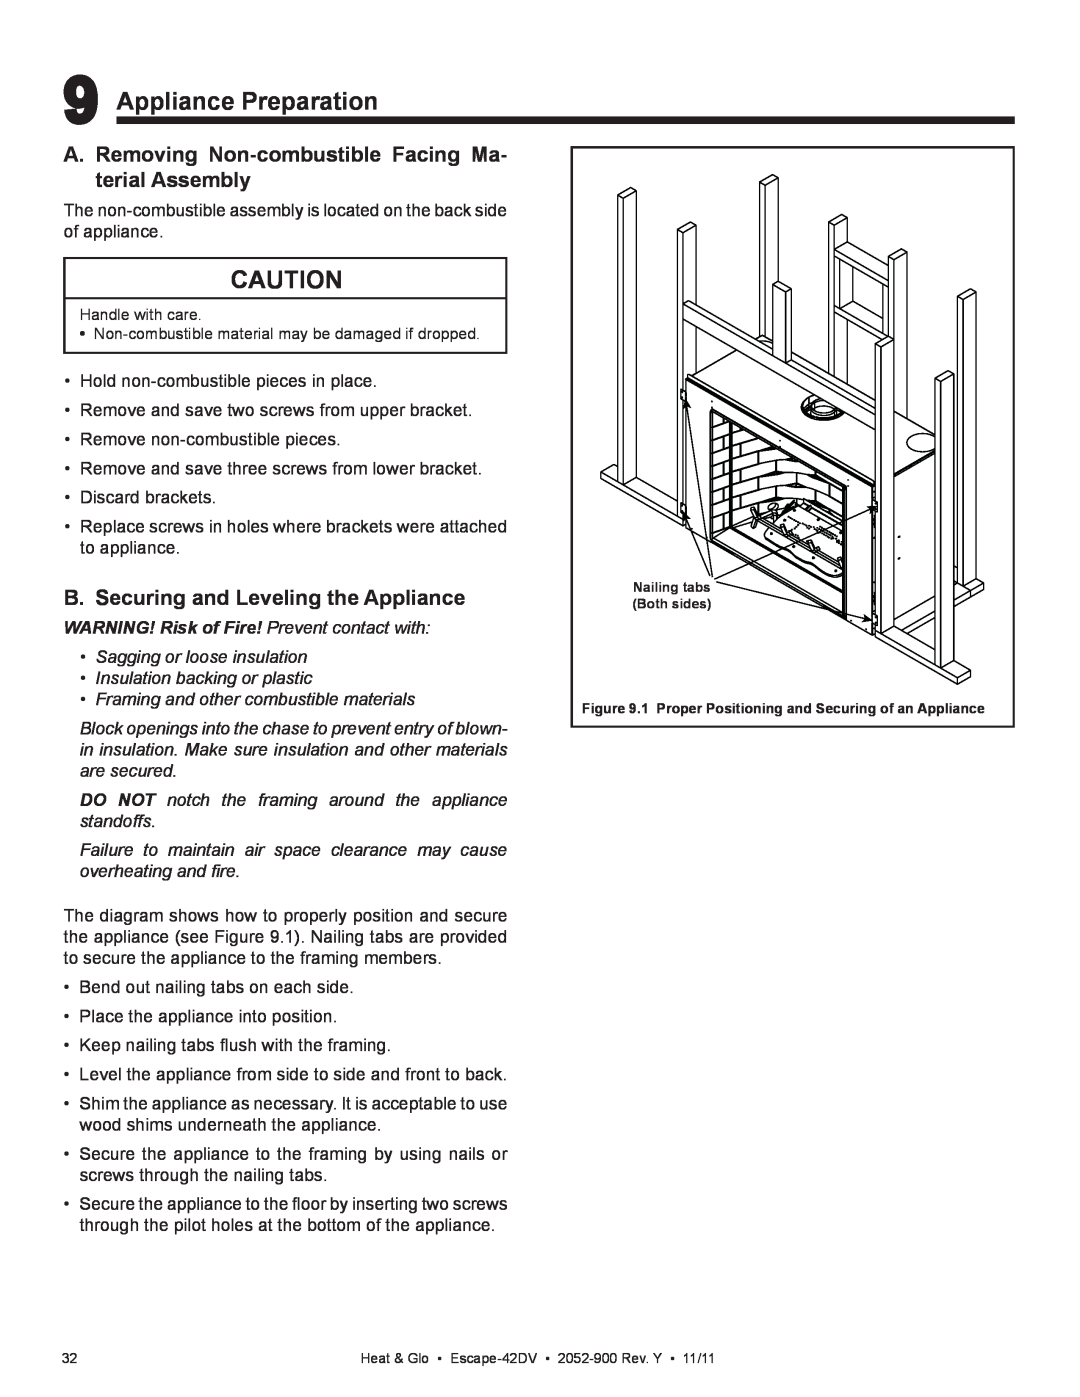 Heat & Glo LifeStyle Escape-42DVLP owner manual Appliance Preparation, B. Securing and Leveling the Appliance 